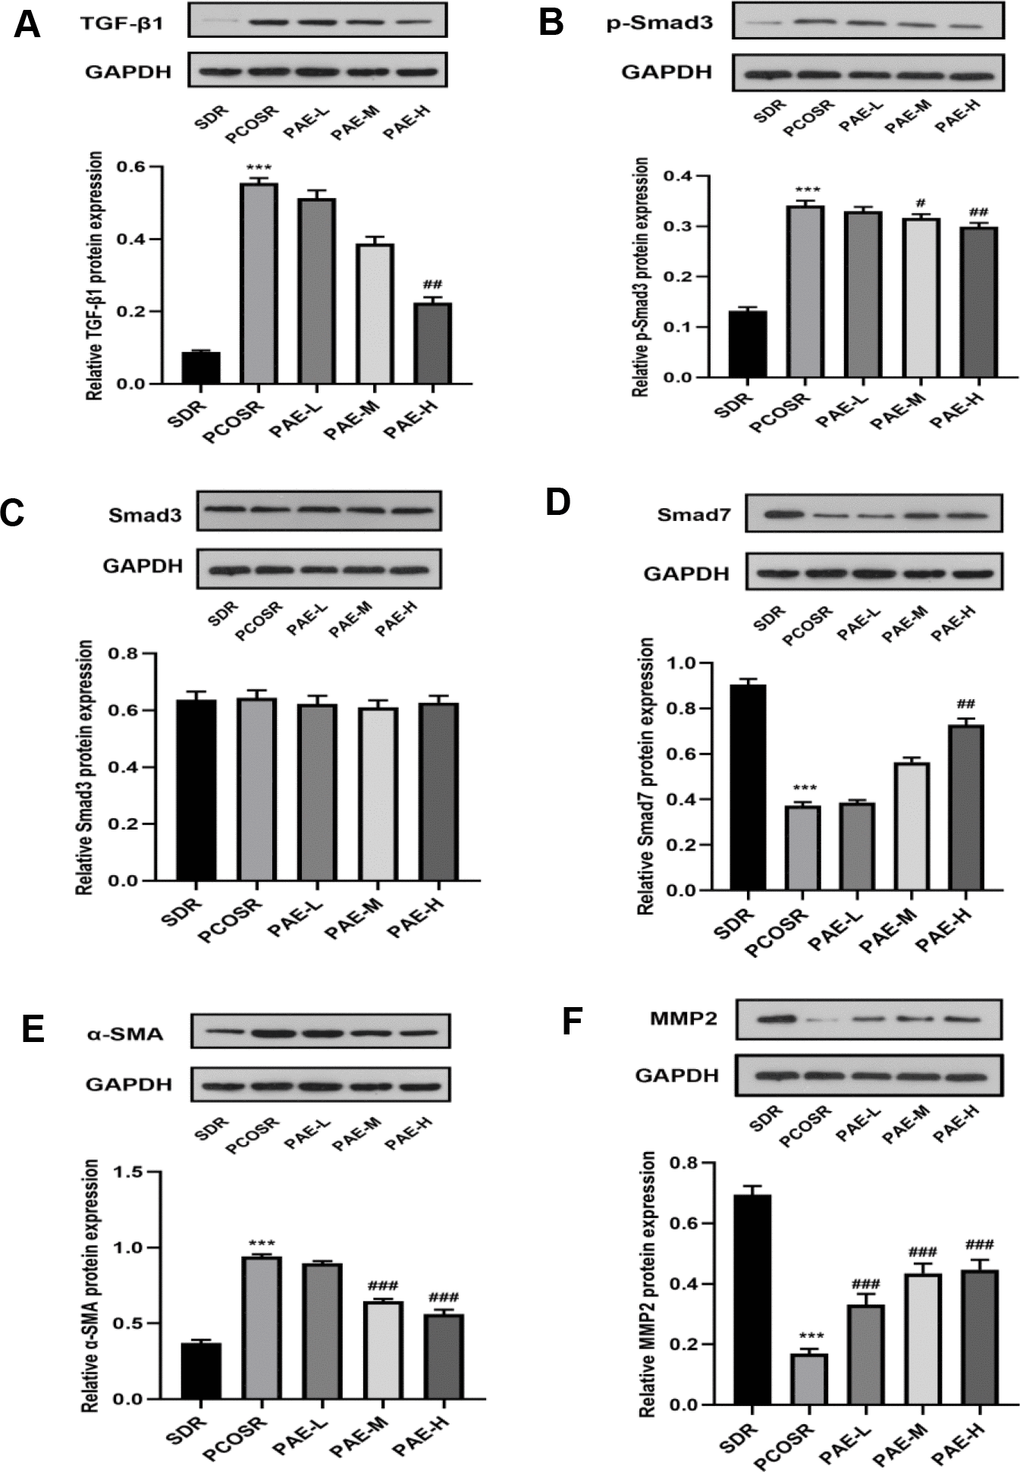 Influence of PAE on the activation of TGF-β1/Smads signaling pathway in PCOS rats was evaluated by western blot. The protein expressions of (A) TGF-β1, (B) p-Smad3, (C) Smad3, (D) Smad7, (E) α-SMA and (F) MMP2 were detected in ovarian tissues of PCOS rats. Same one GAPDH was used as the internal standard in (A, D, E). Same one GAPDH was used as the internal standard in (B, C, F). *P 